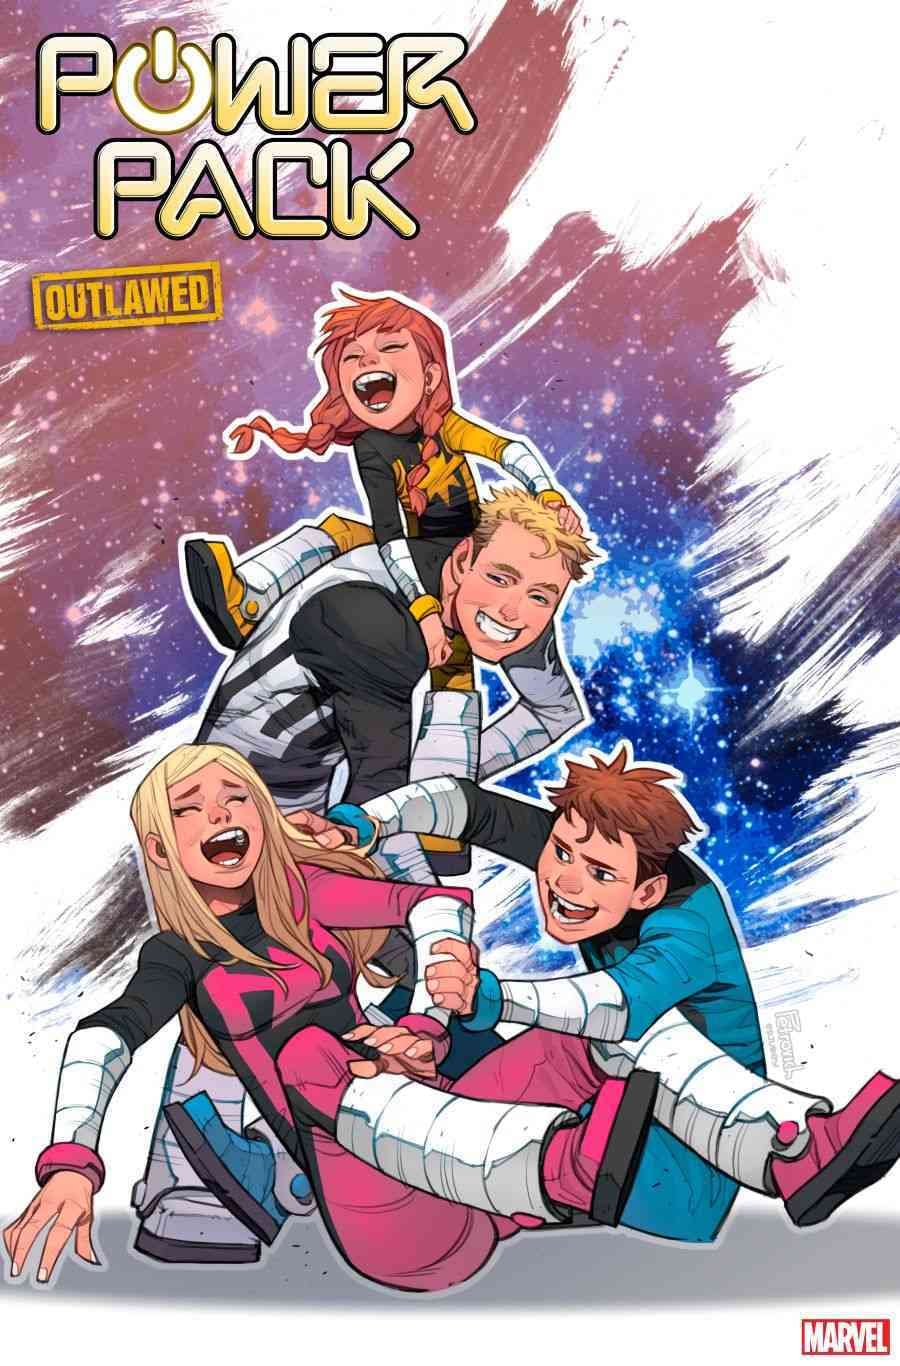 And Now a New Power Pack Series, From Ryan North and Nico Leon